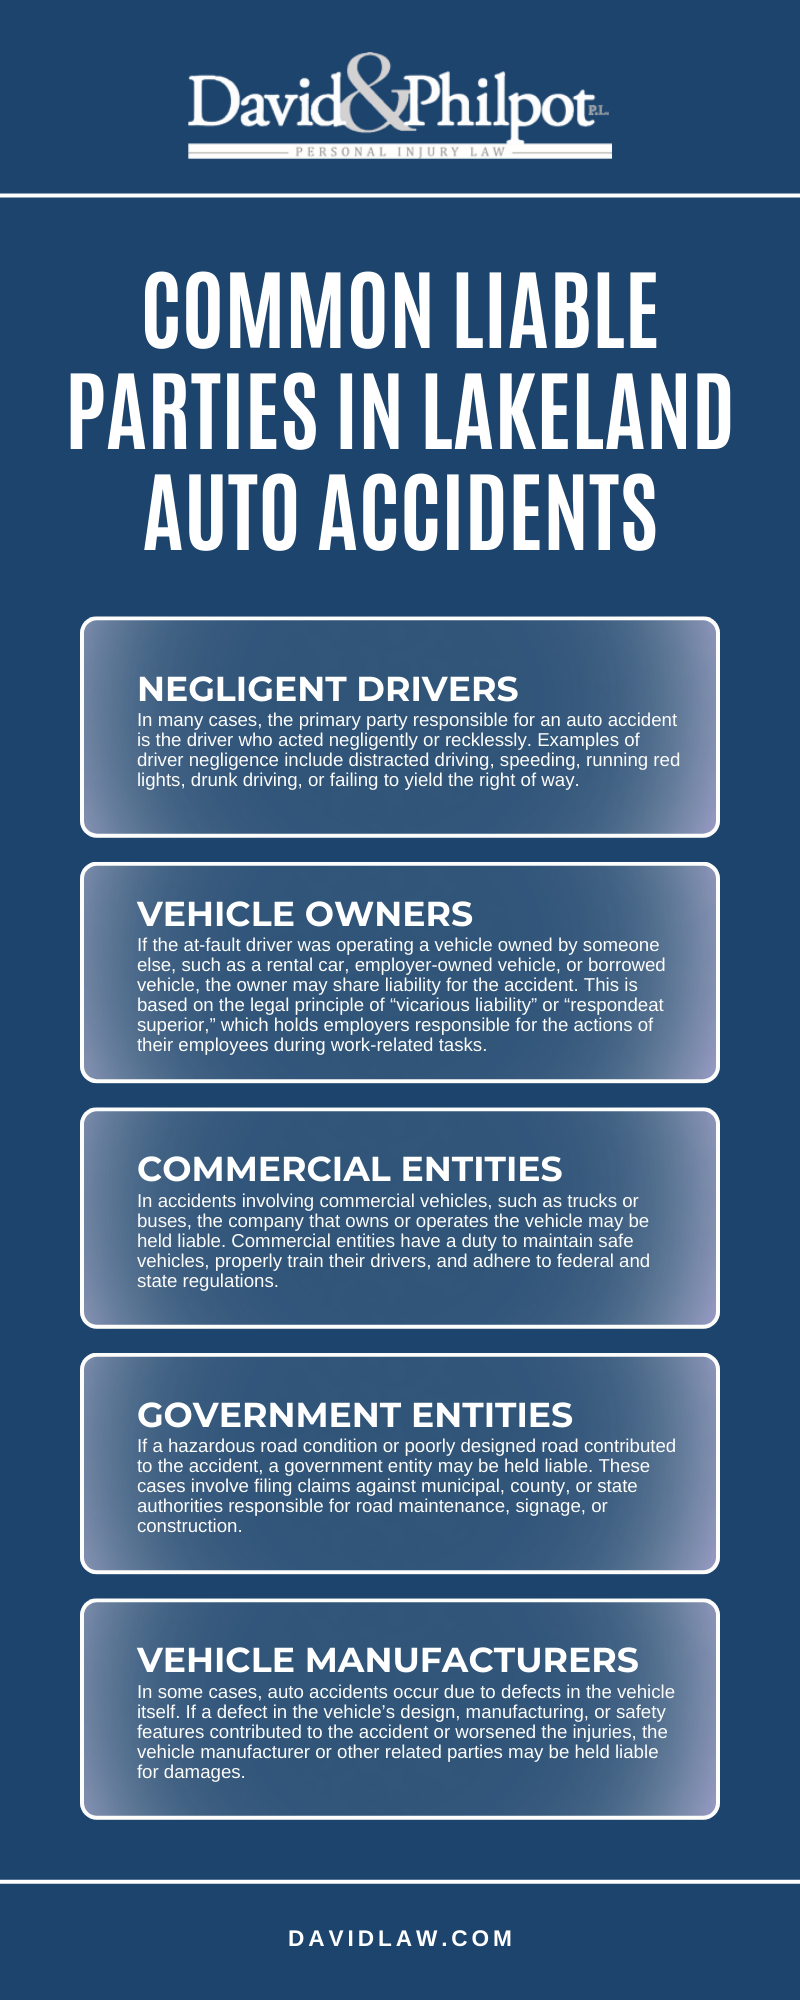 Common Liable Parties In Lakeland Auto Accidents Infographic